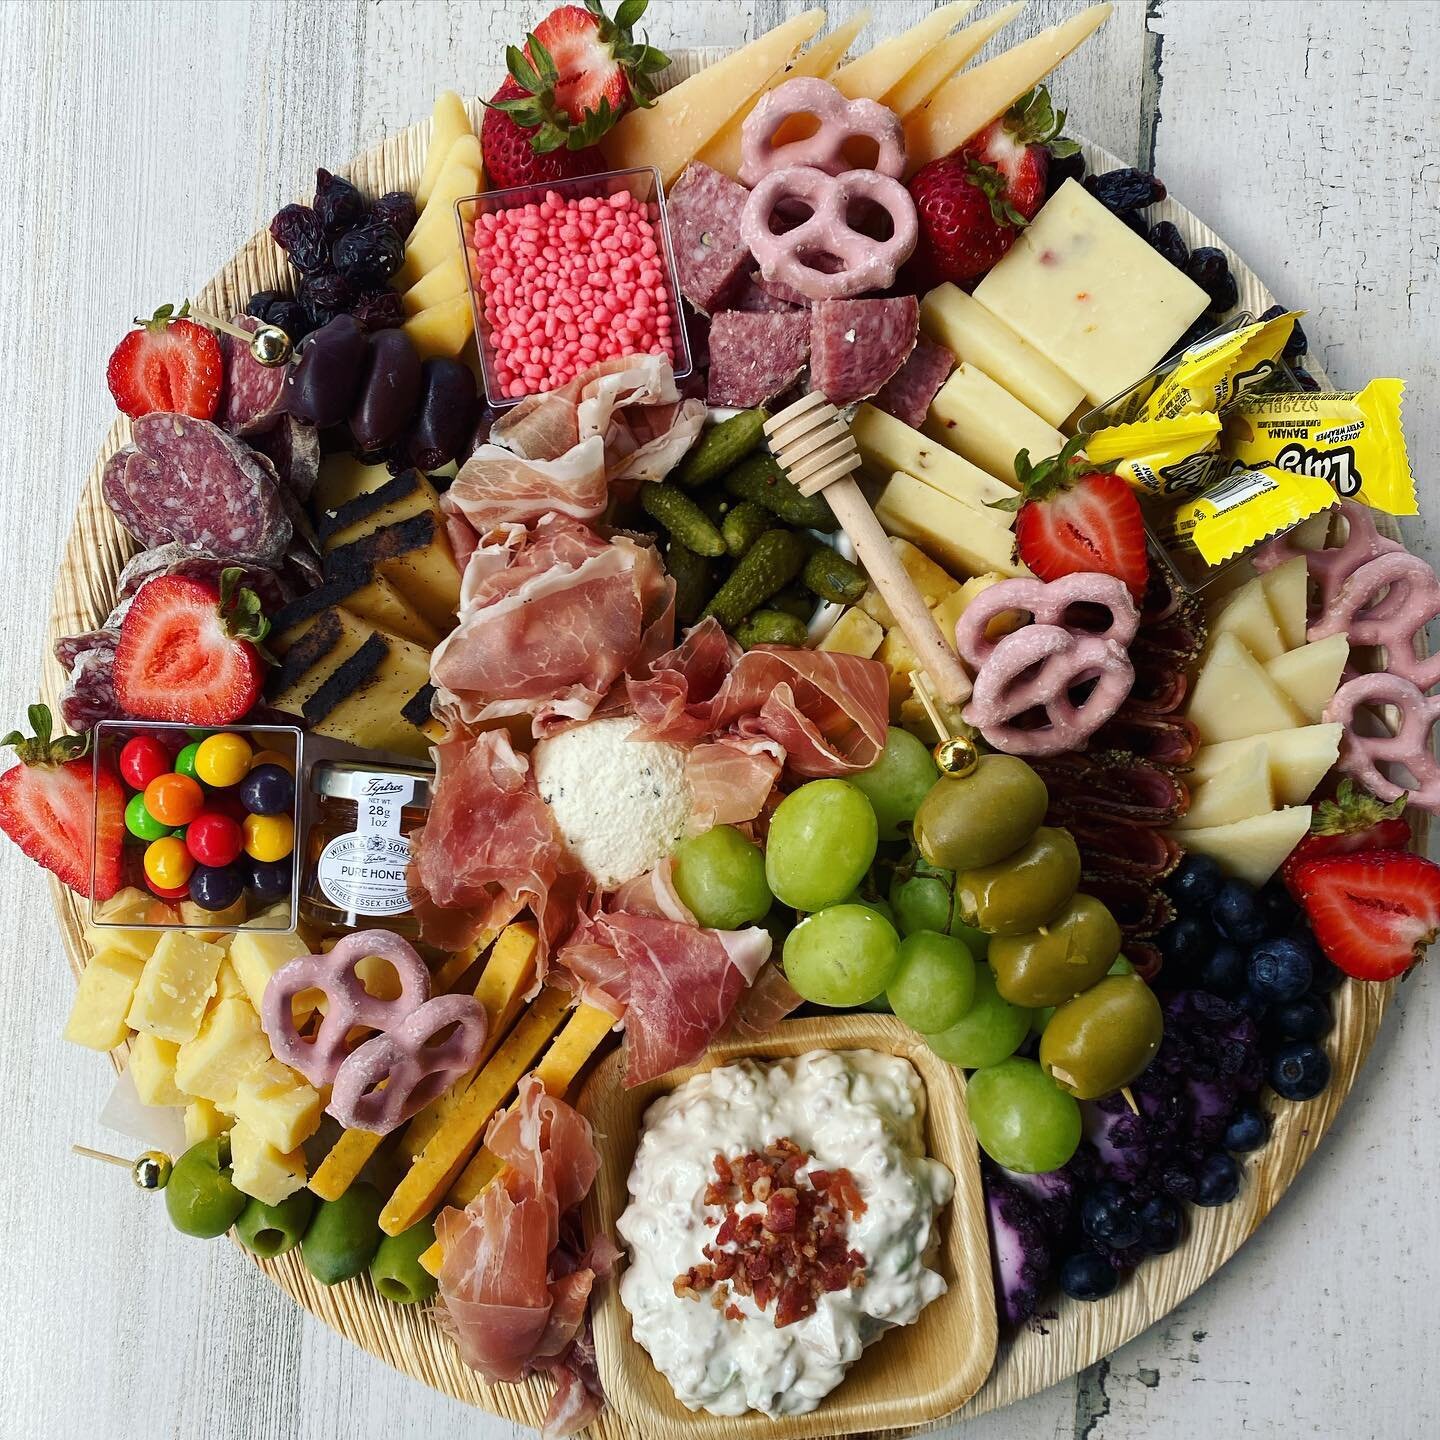 BIRTHDAY PLATTER::: Swipe to see the TRANSFORMATION 😜
*
I created this platter for a special birthday boy who used to come visit us back in the @mycheeseshoppe days! I swear he could barely say &quot;cheese&quot; when he first started coming in. He 